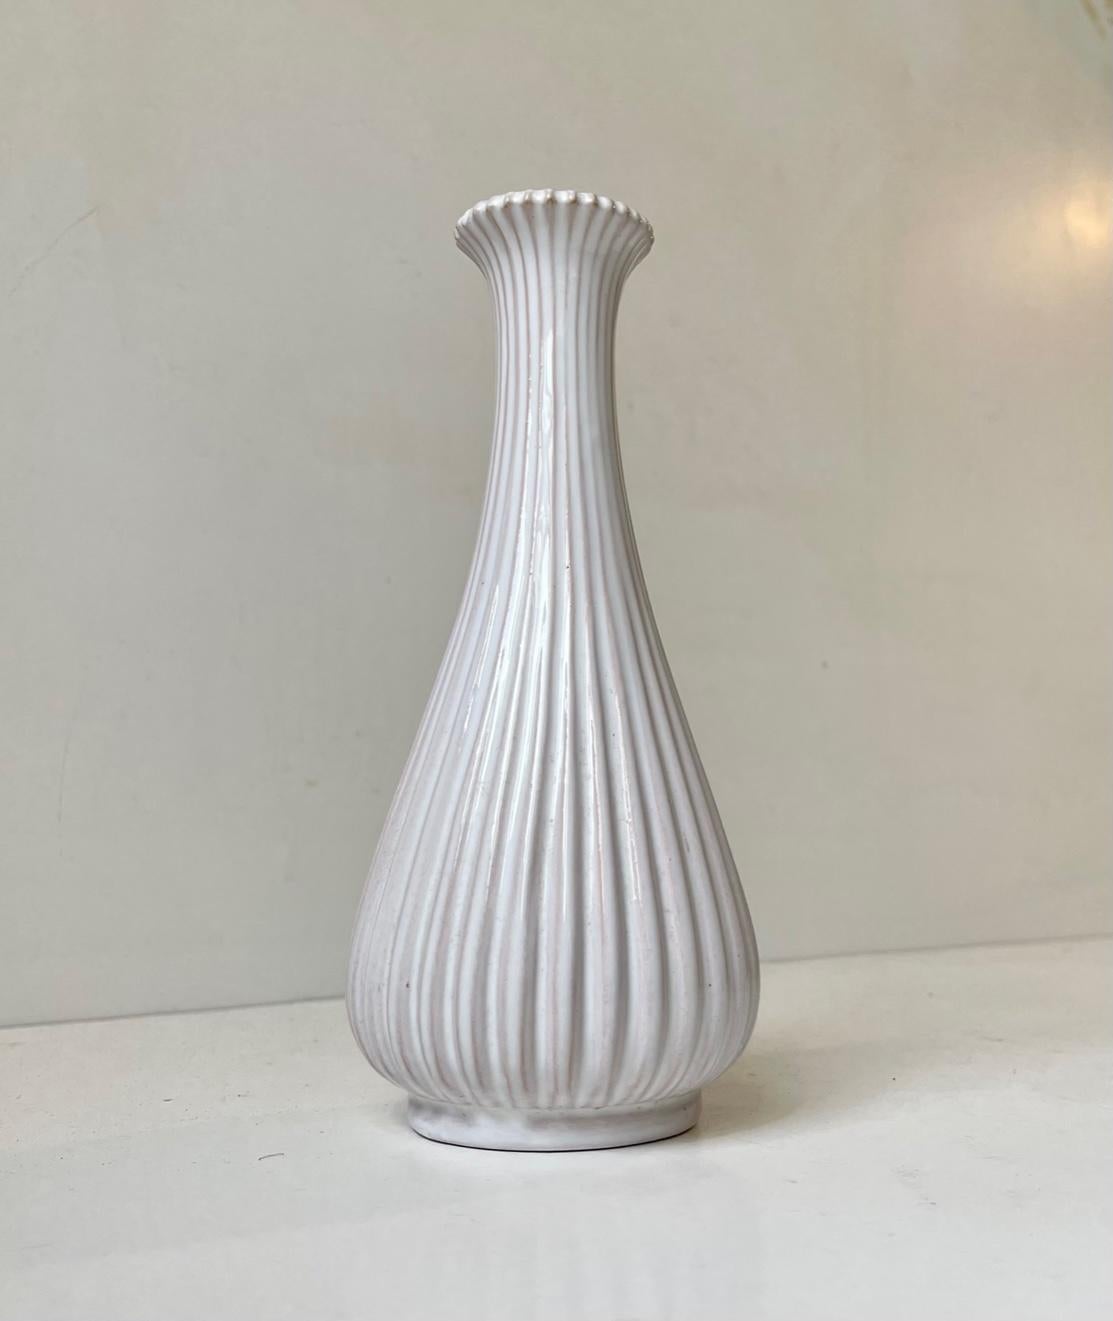 Art deco revival ceramic vase from the 1950s. Fluted fully glazed corpus in white glaze. Its designed by Eslau in Denmark and manufactured at their own Studio during the 1950s or 60s. This style has clear reference points to Arne Bang in particular.